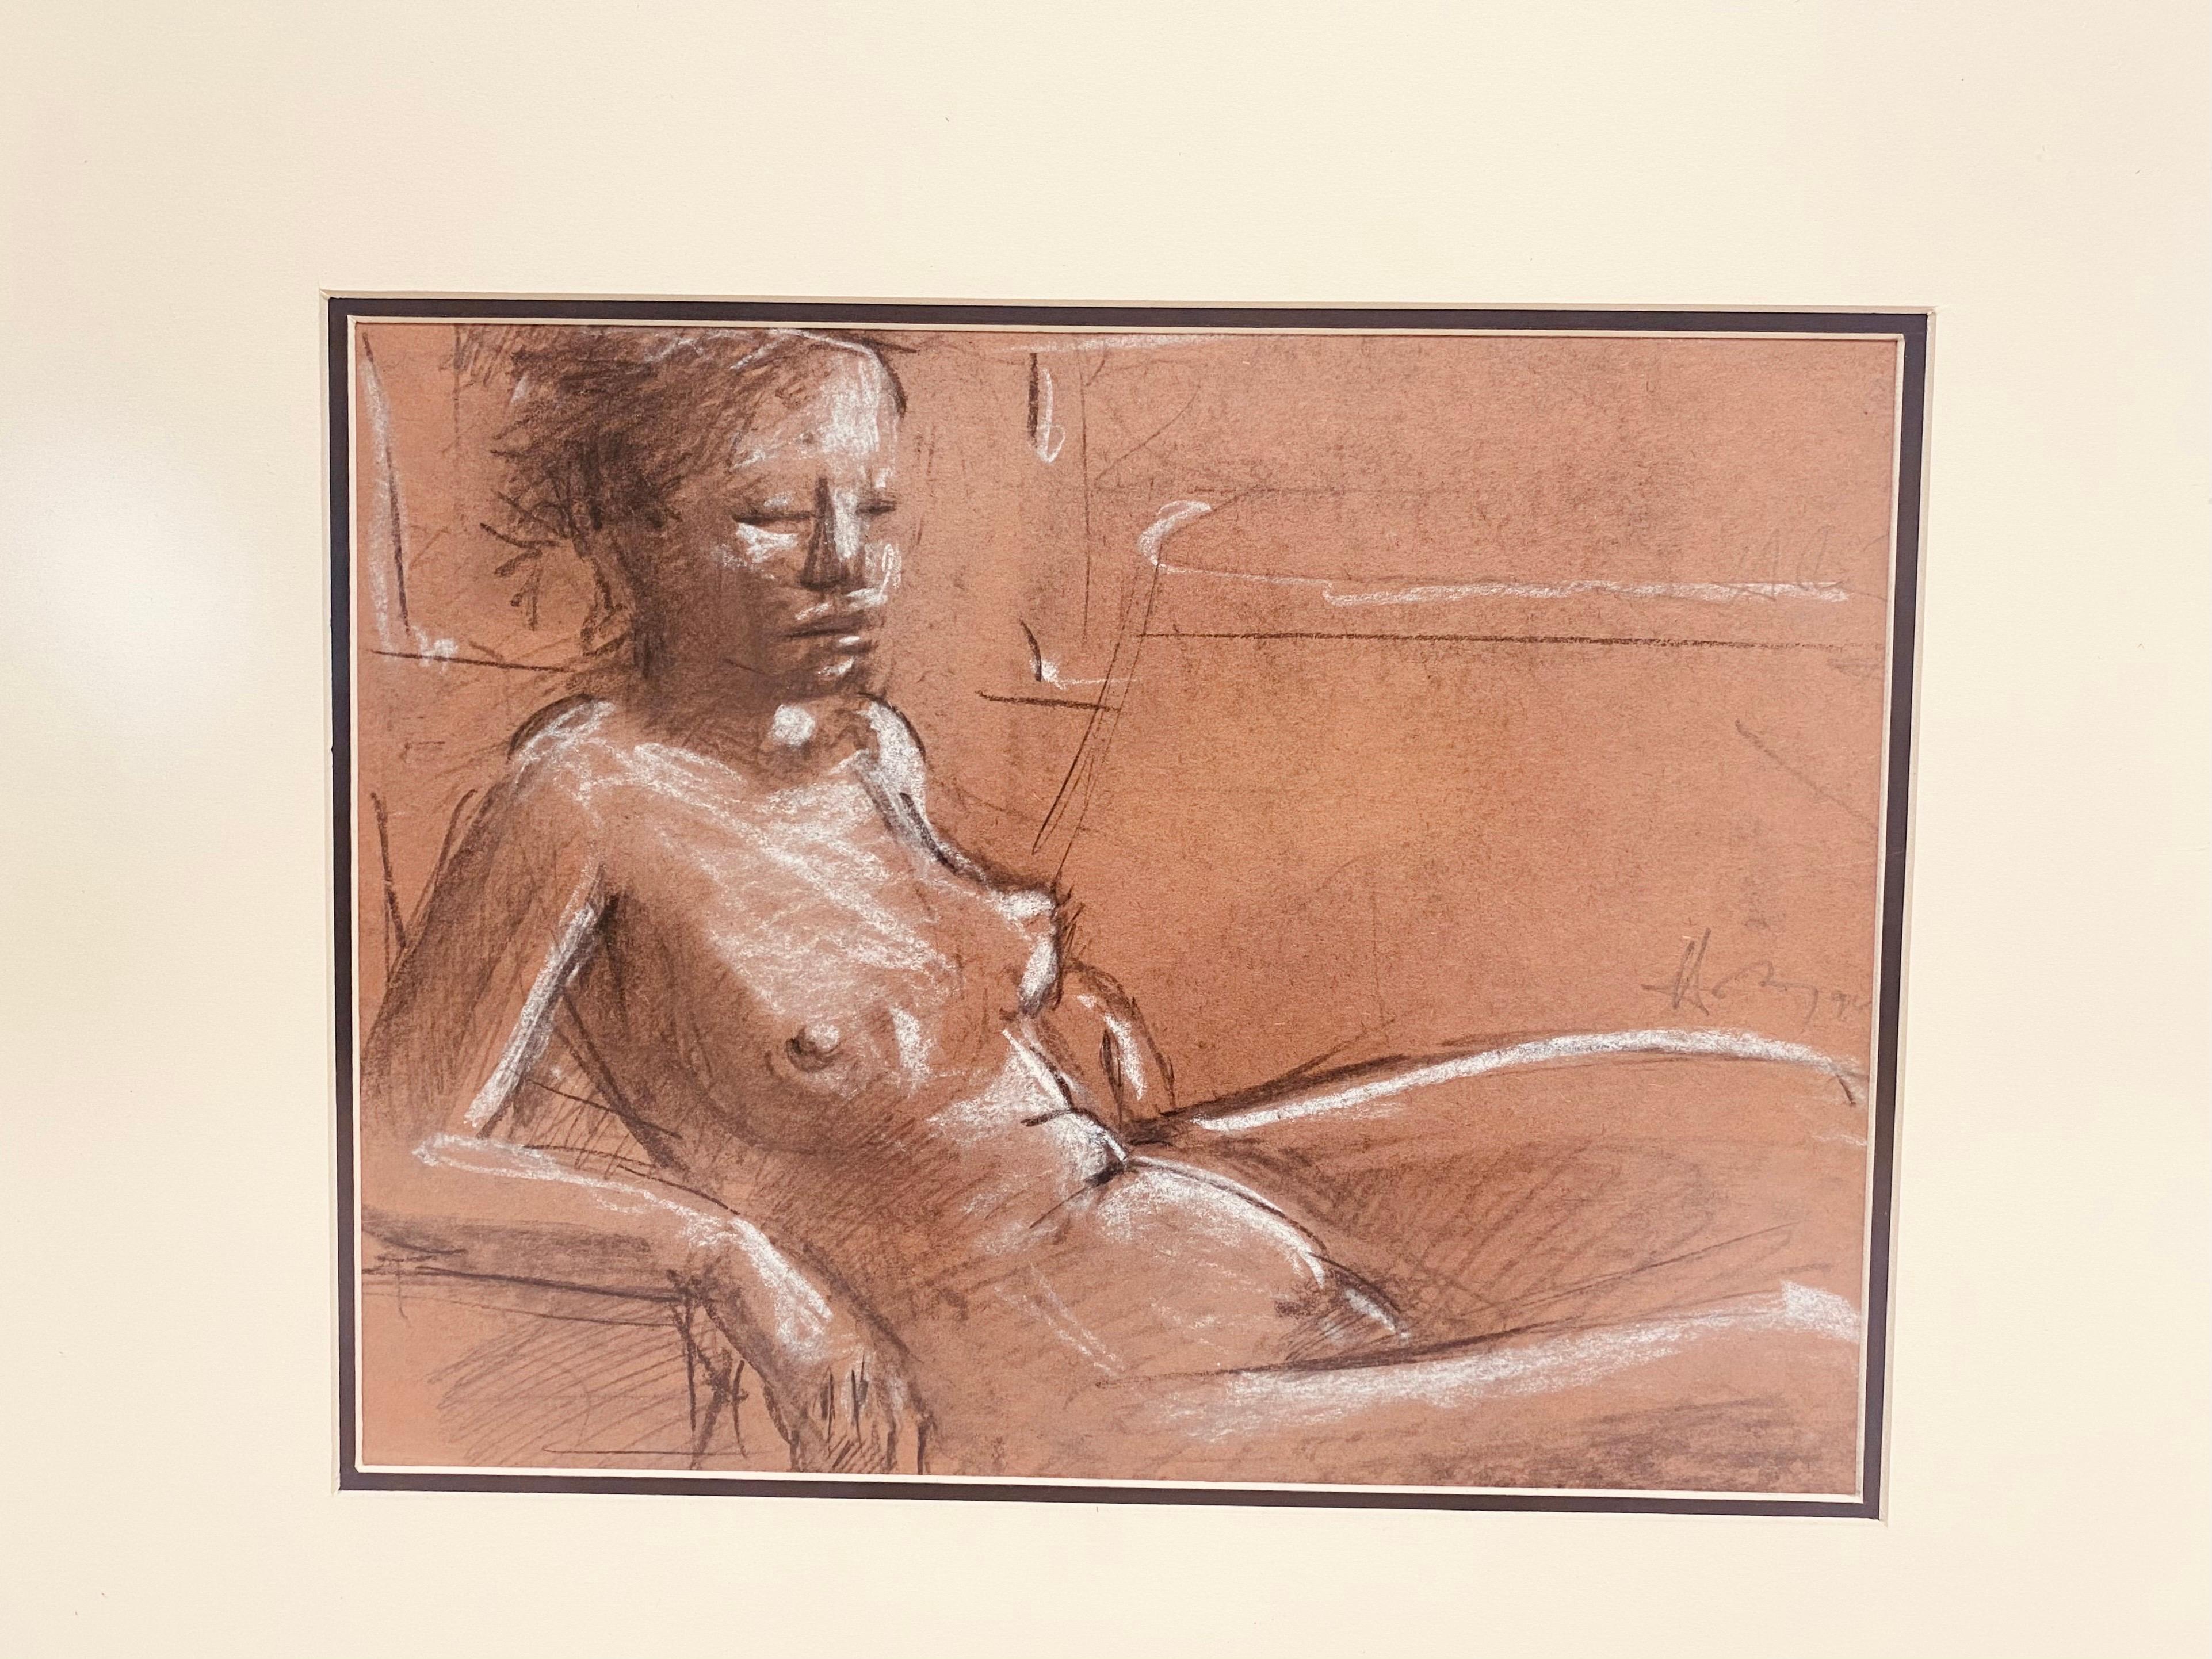 This is a mid century vintage female nude study in charcoal. This Academy style charcoal drawing is in a mid century pickled frame with cream and black mat boards. The charcoal drawing is in tones of cream and black on an amber colored paper.